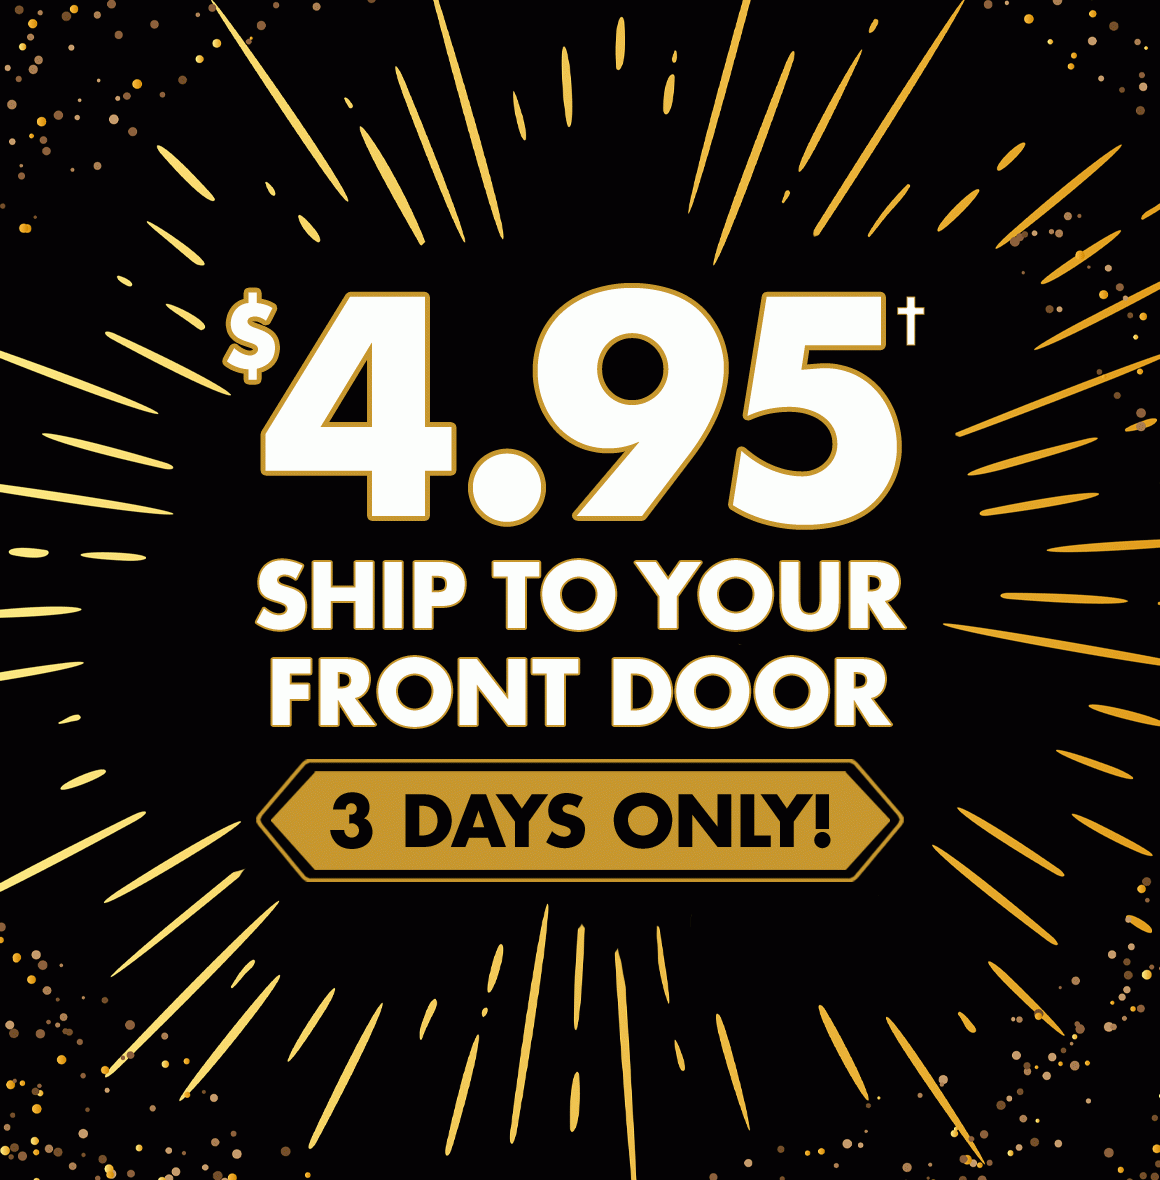 Enjoy 3 Days of Discounted Shipping!